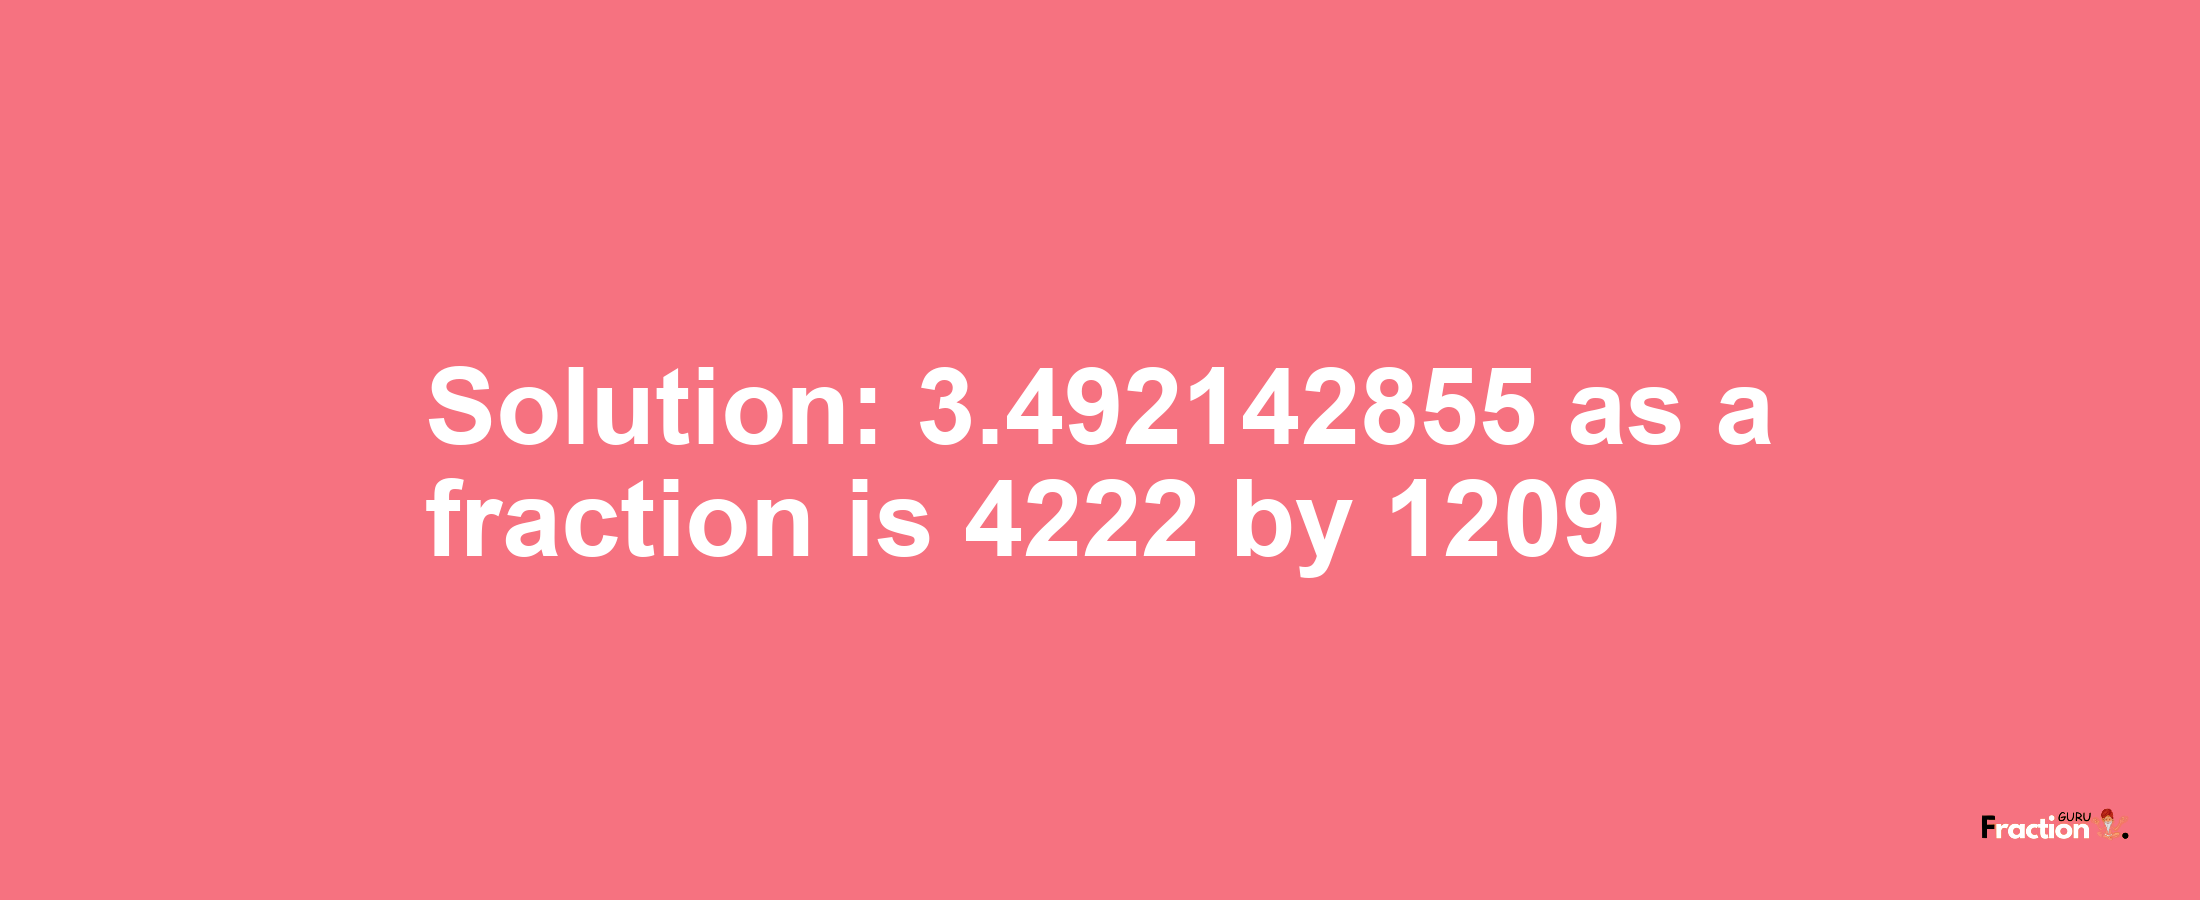 Solution:3.492142855 as a fraction is 4222/1209